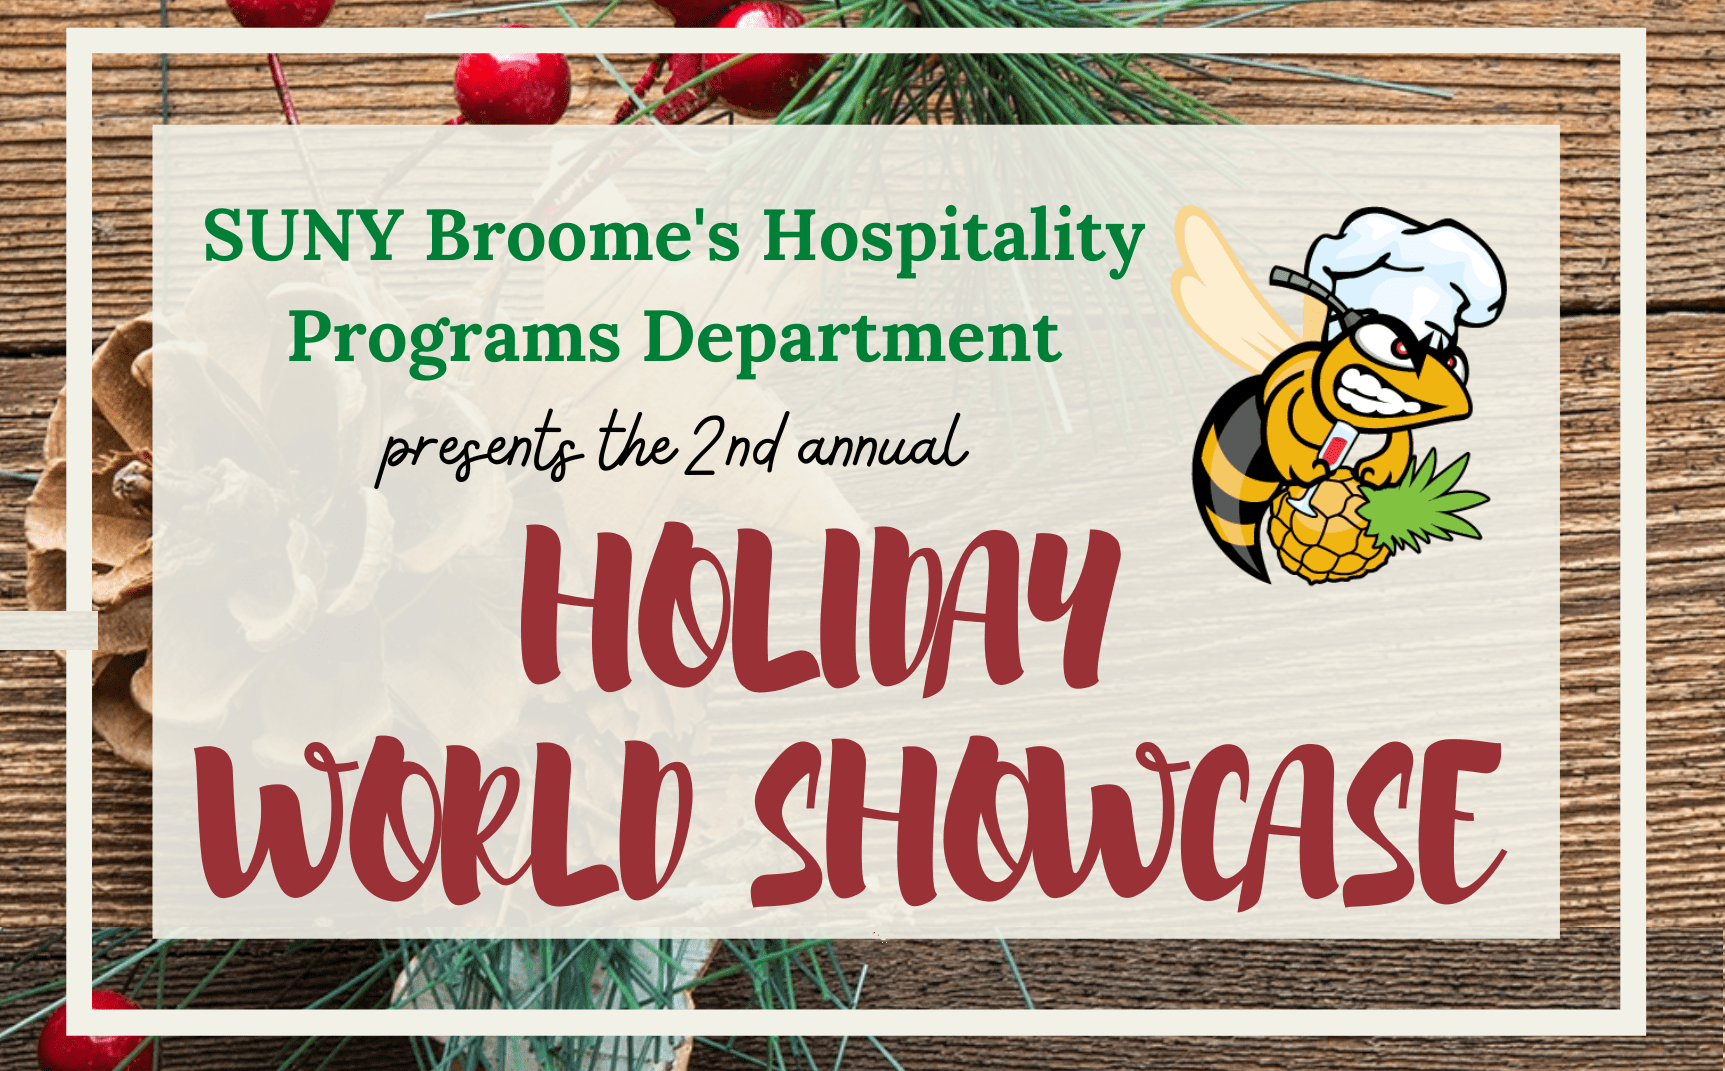 SUNY Broome's Hospitality Programs Department presents the 2nd annual Holiday World Showcase